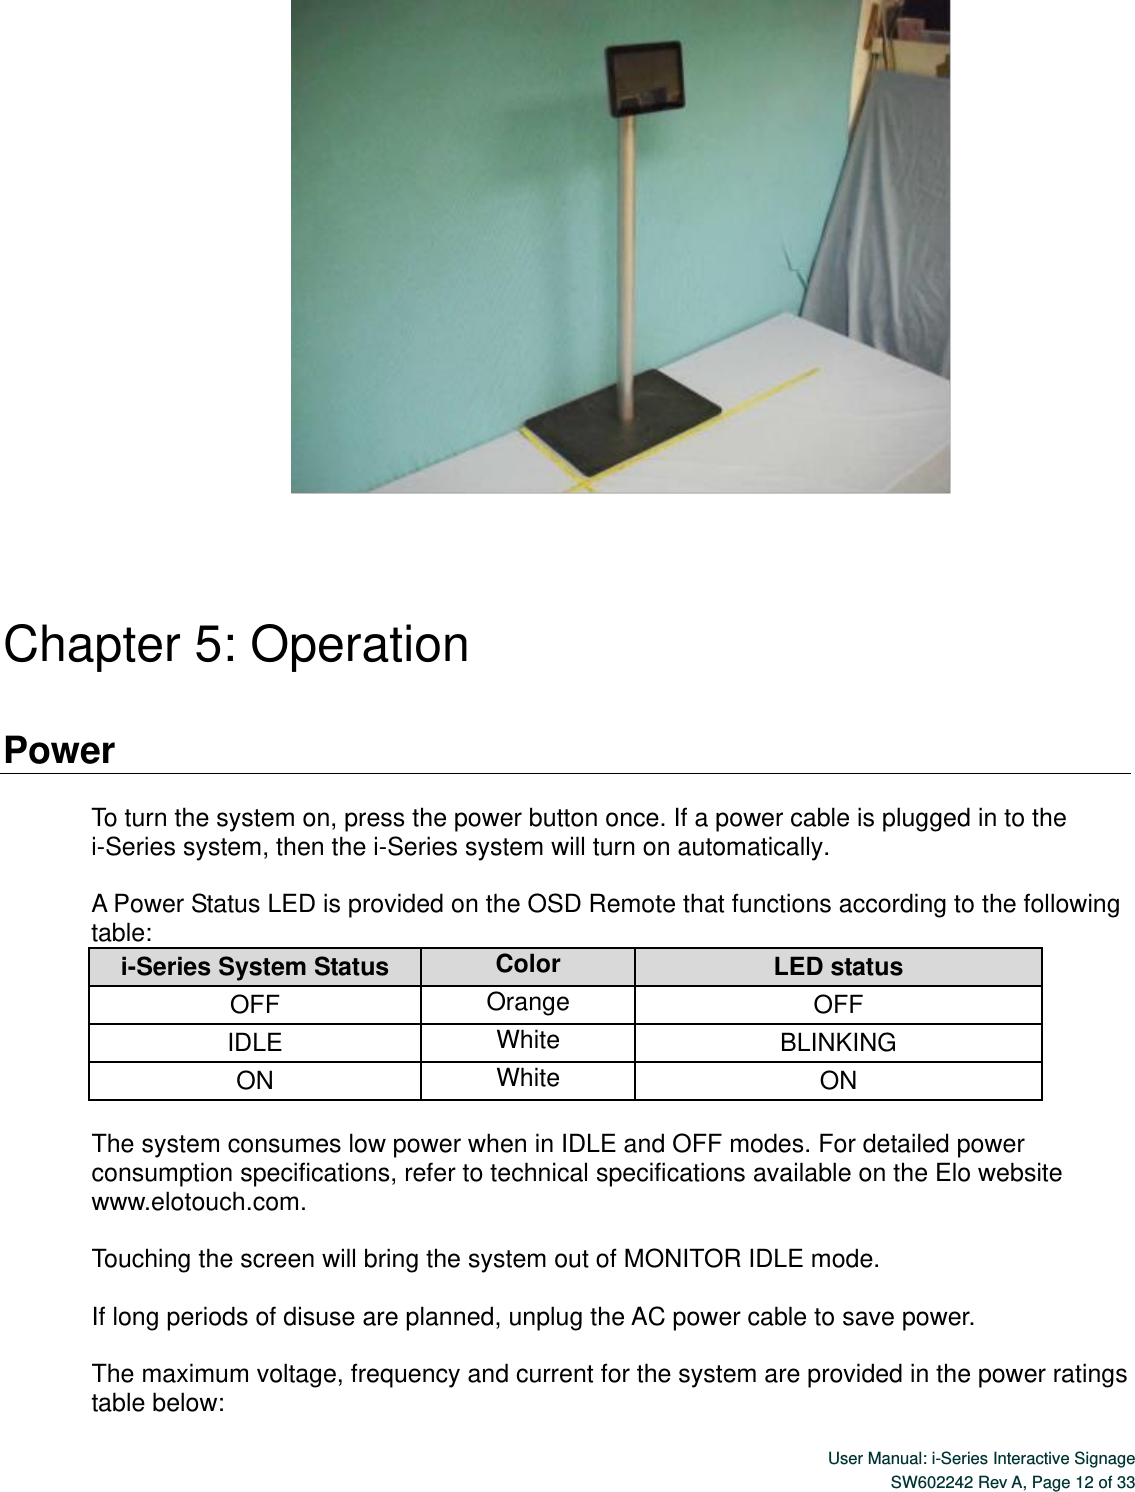  User Manual: i-Series Interactive Signage SW602242 Rev A, Page 12 of 33        Chapter 5: Operation  Power  To turn the system on, press the power button once. If a power cable is plugged in to the i-Series system, then the i-Series system will turn on automatically.  A Power Status LED is provided on the OSD Remote that functions according to the following table: i-Series System Status Color LED status OFF Orange OFF IDLE White BLINKING ON White ON  The system consumes low power when in IDLE and OFF modes. For detailed power consumption specifications, refer to technical specifications available on the Elo website www.elotouch.com.  Touching the screen will bring the system out of MONITOR IDLE mode.    If long periods of disuse are planned, unplug the AC power cable to save power.  The maximum voltage, frequency and current for the system are provided in the power ratings table below: 